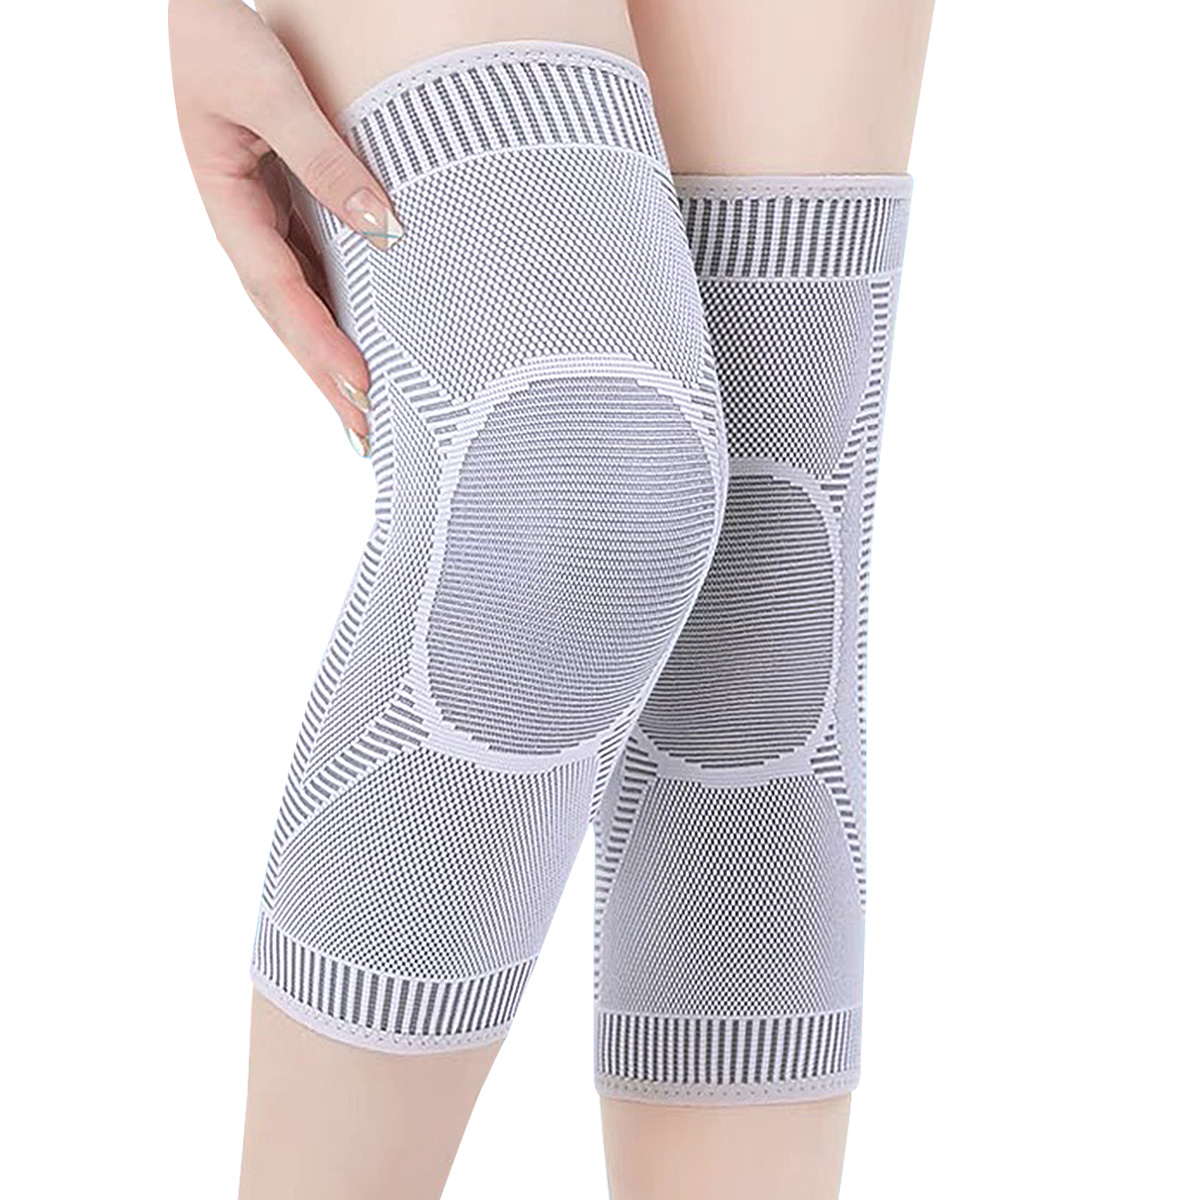 Knitting Warm Compression Medical Knee Support